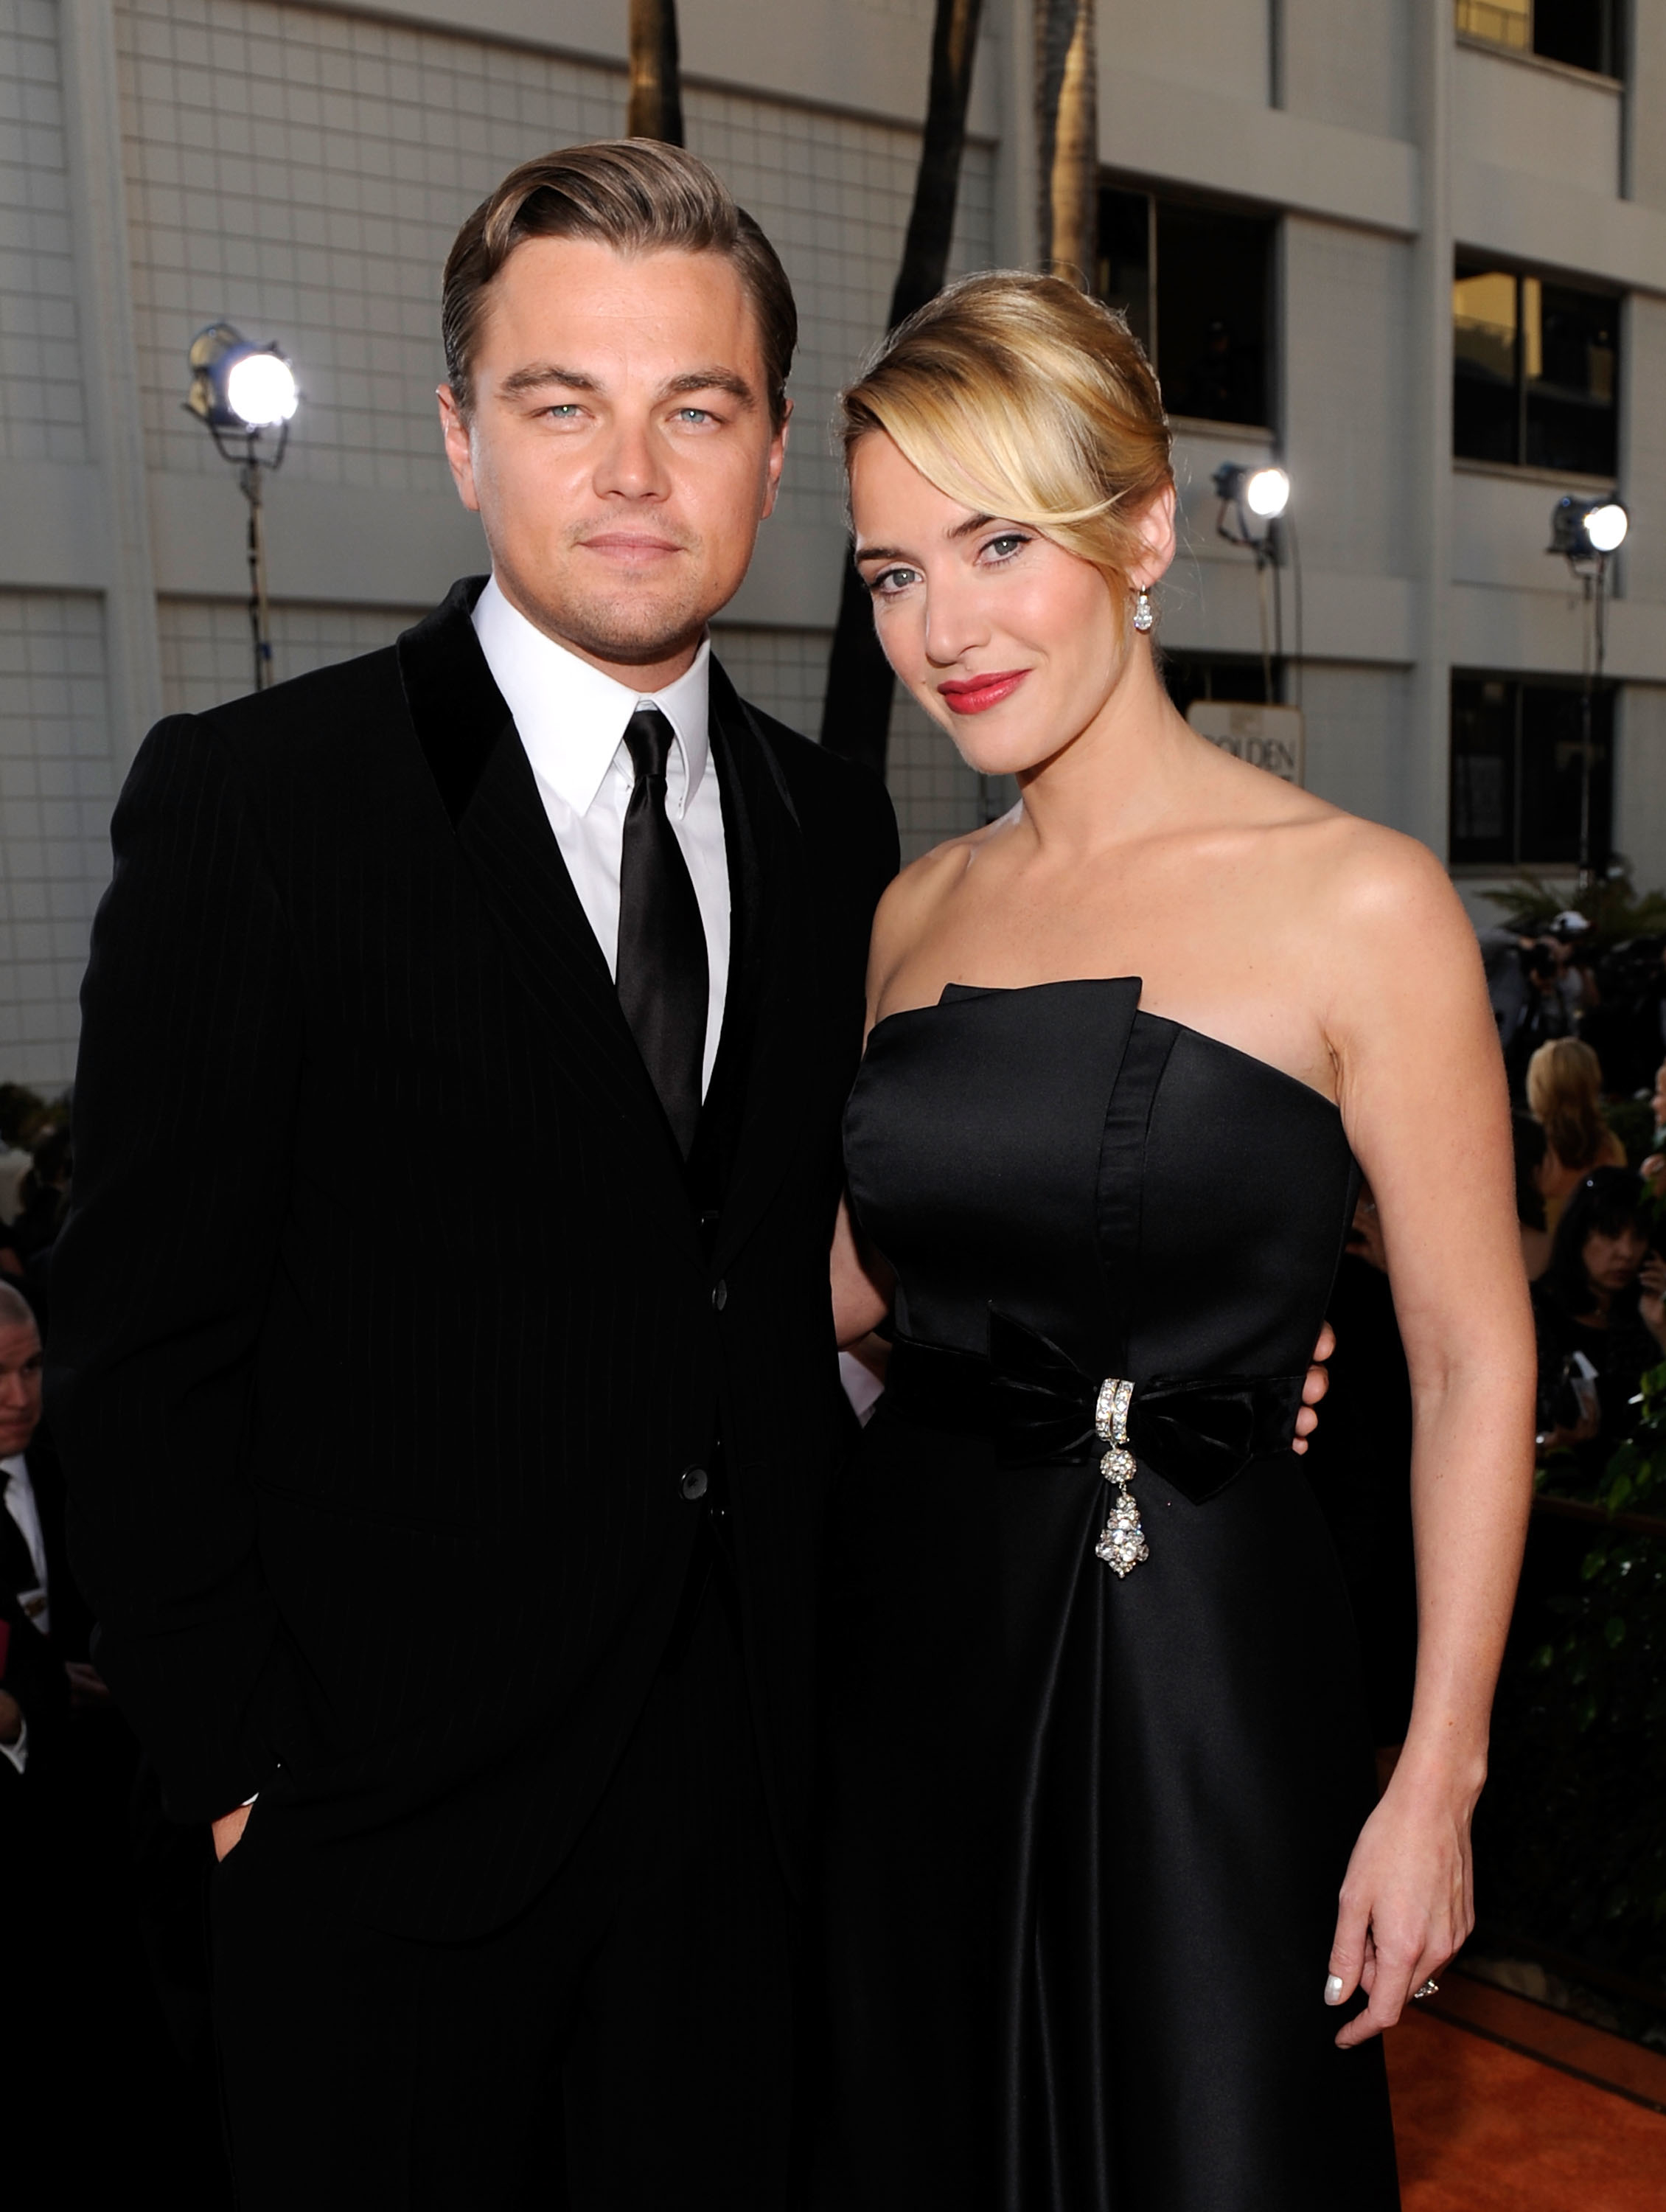 Leo in a suit and tie and Kate in a strapless gown